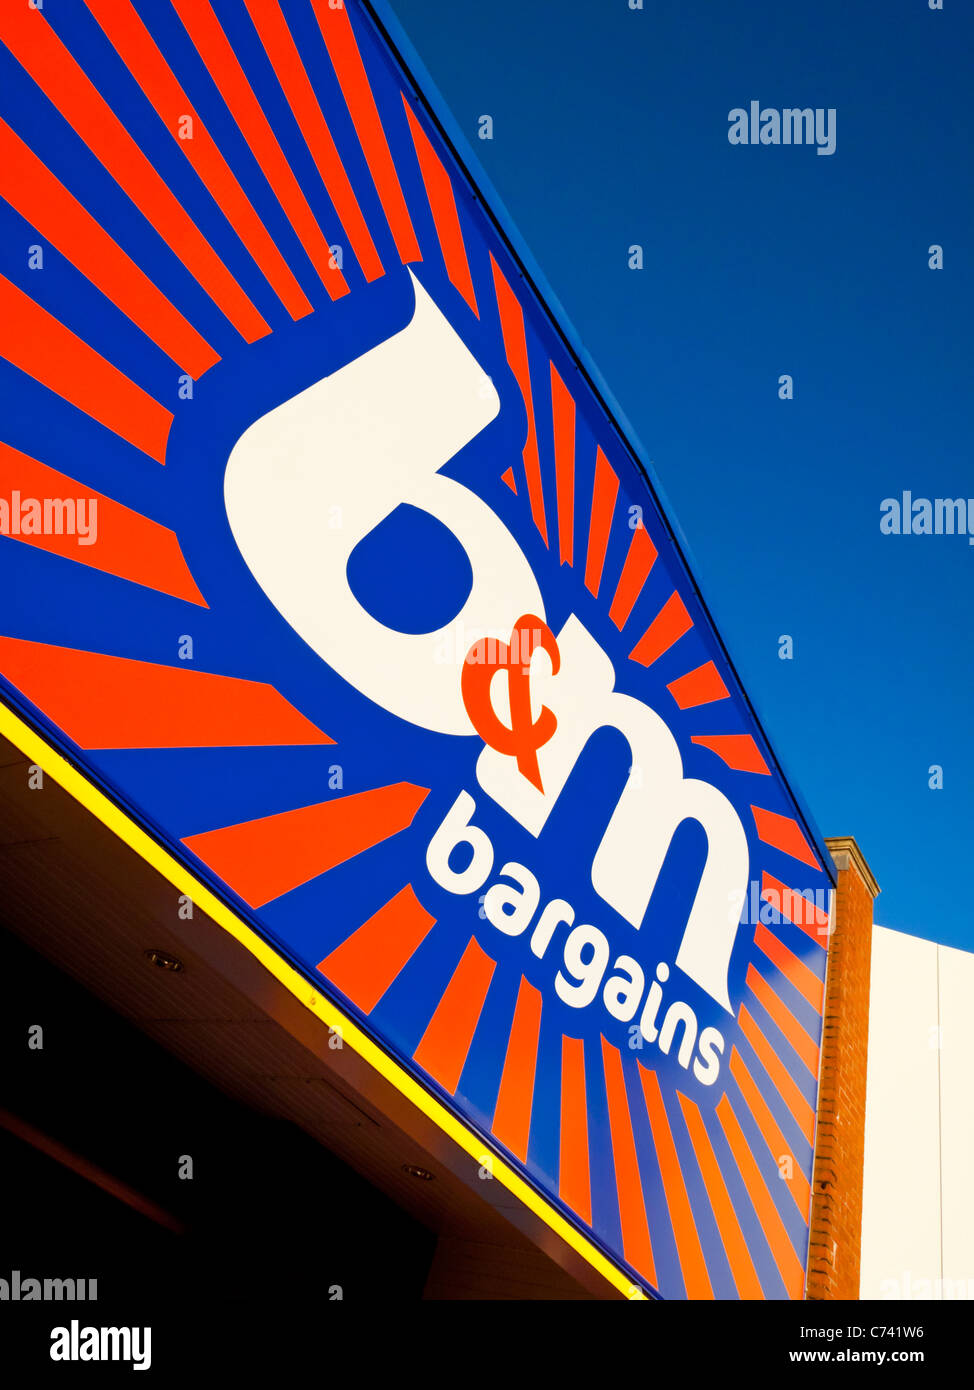 B&M Bargains shop in the UK which sells budget priced products and has enjoyed sharp growth during the economic downturn Stock Photo